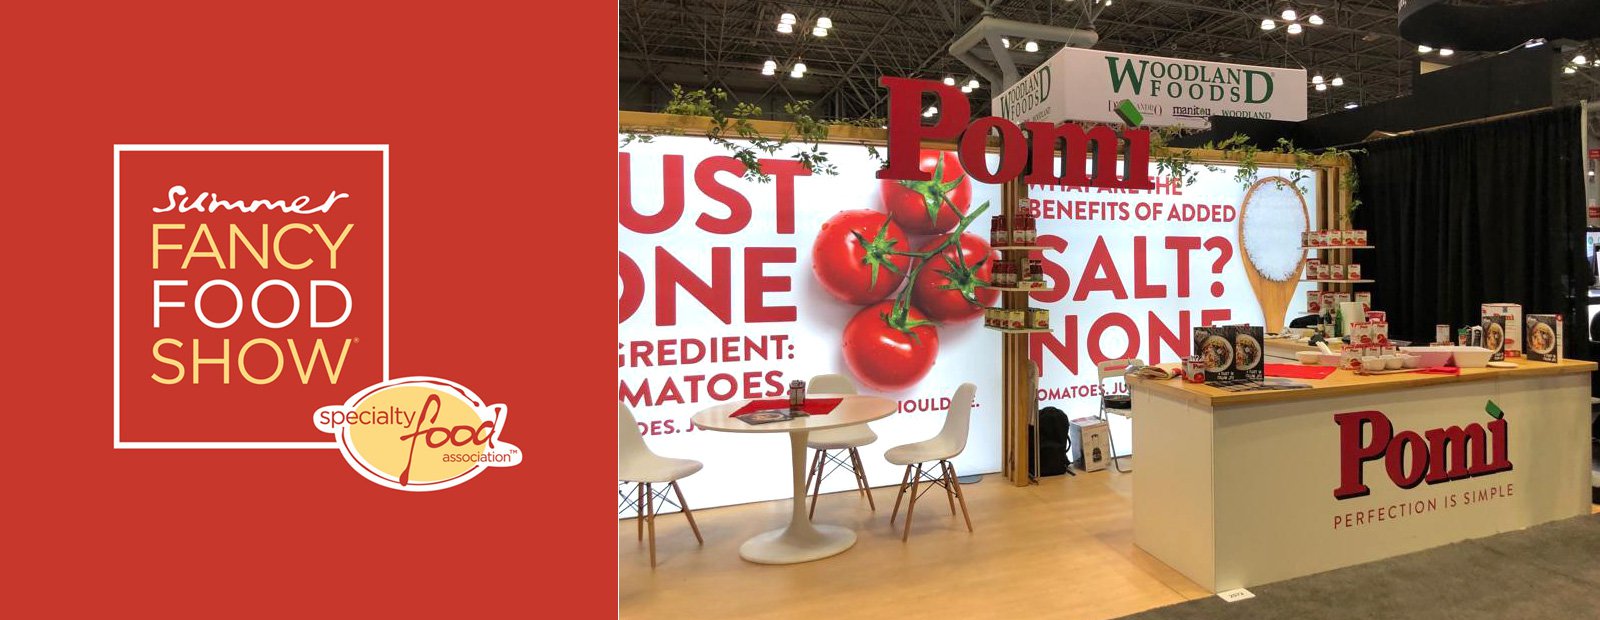 Pomì at the Summer Fancy Food in New York